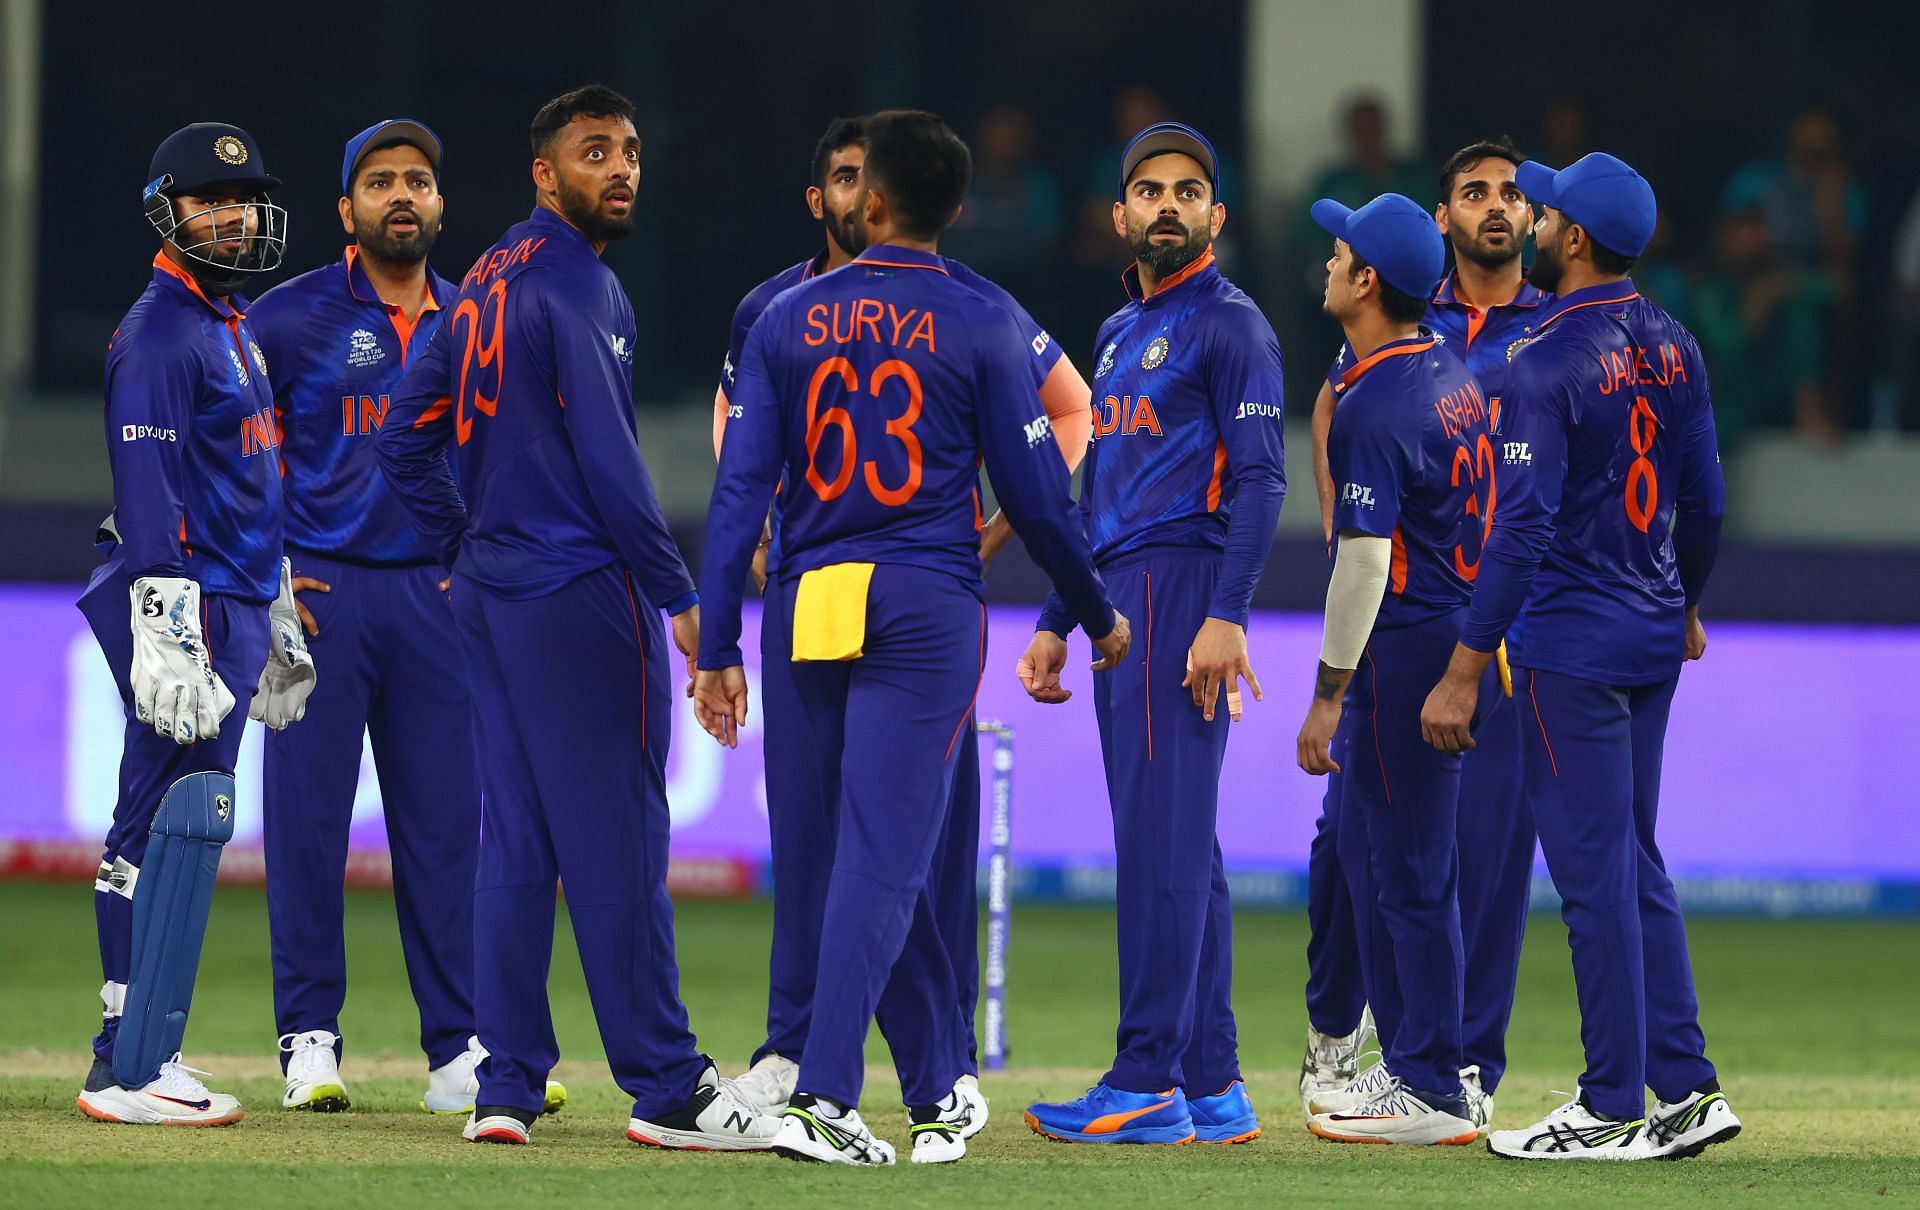 India lost their first match of ICC T20 World Cup 2021 to Pakistan